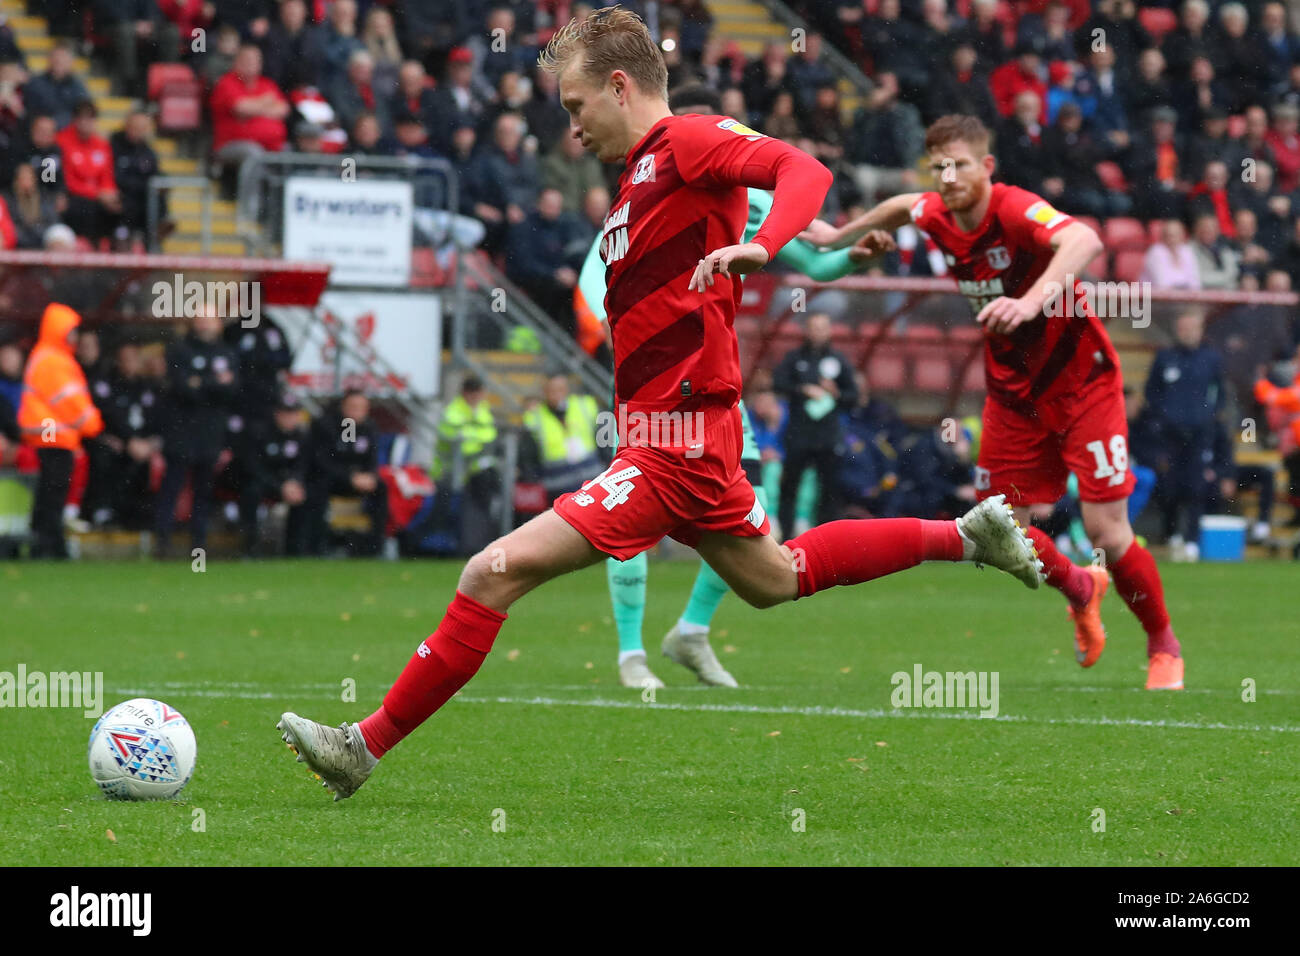 London, UK. 26th Oct, 2019. Orient's midfielder Josh Wright scores a goal from a penalty during the EFL League Two match between Leyton Orient and Carlisle, at Brisbane Road, London, on 26 October 2019 Credit: Action Foto Sport/Alamy Live News Stock Photo